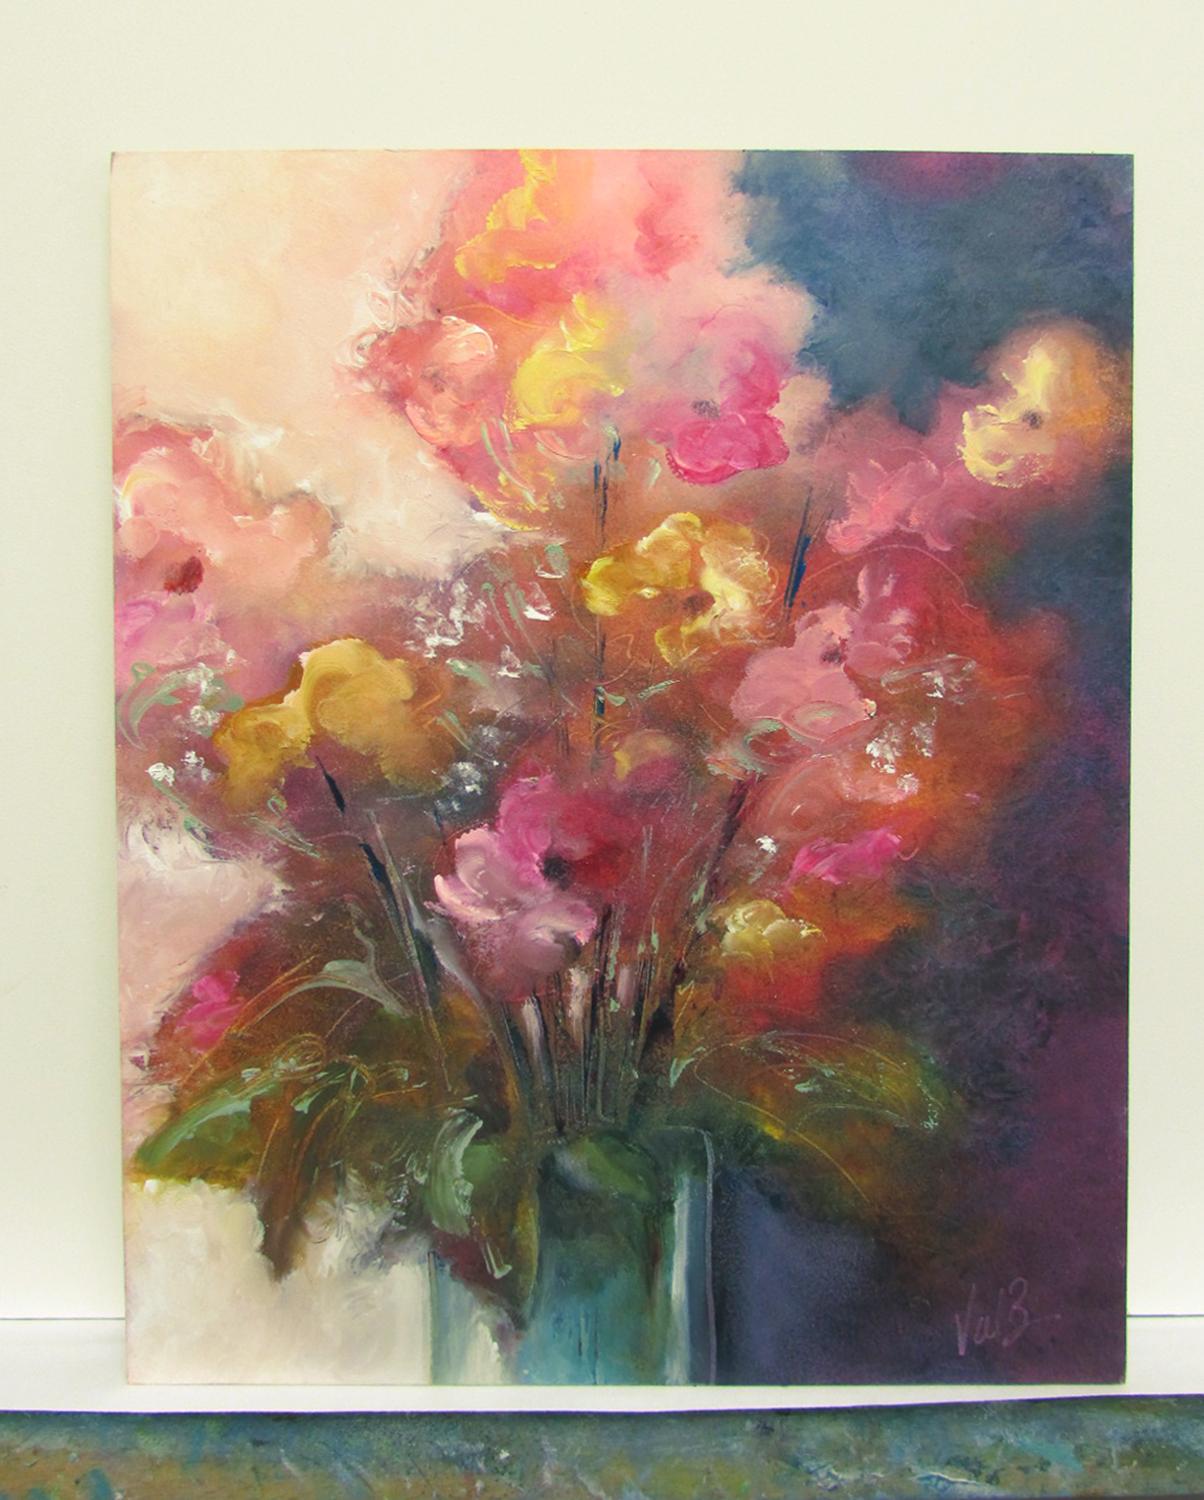 <p>Artist Comments<br>Artist Valerie Berkely presents a floral still life in expressive and fluid paintwork. She executes the piece with wet-on-wet fingerprinting allowing her to tap into her intuition. The work evokes a feeling of exuberance in the